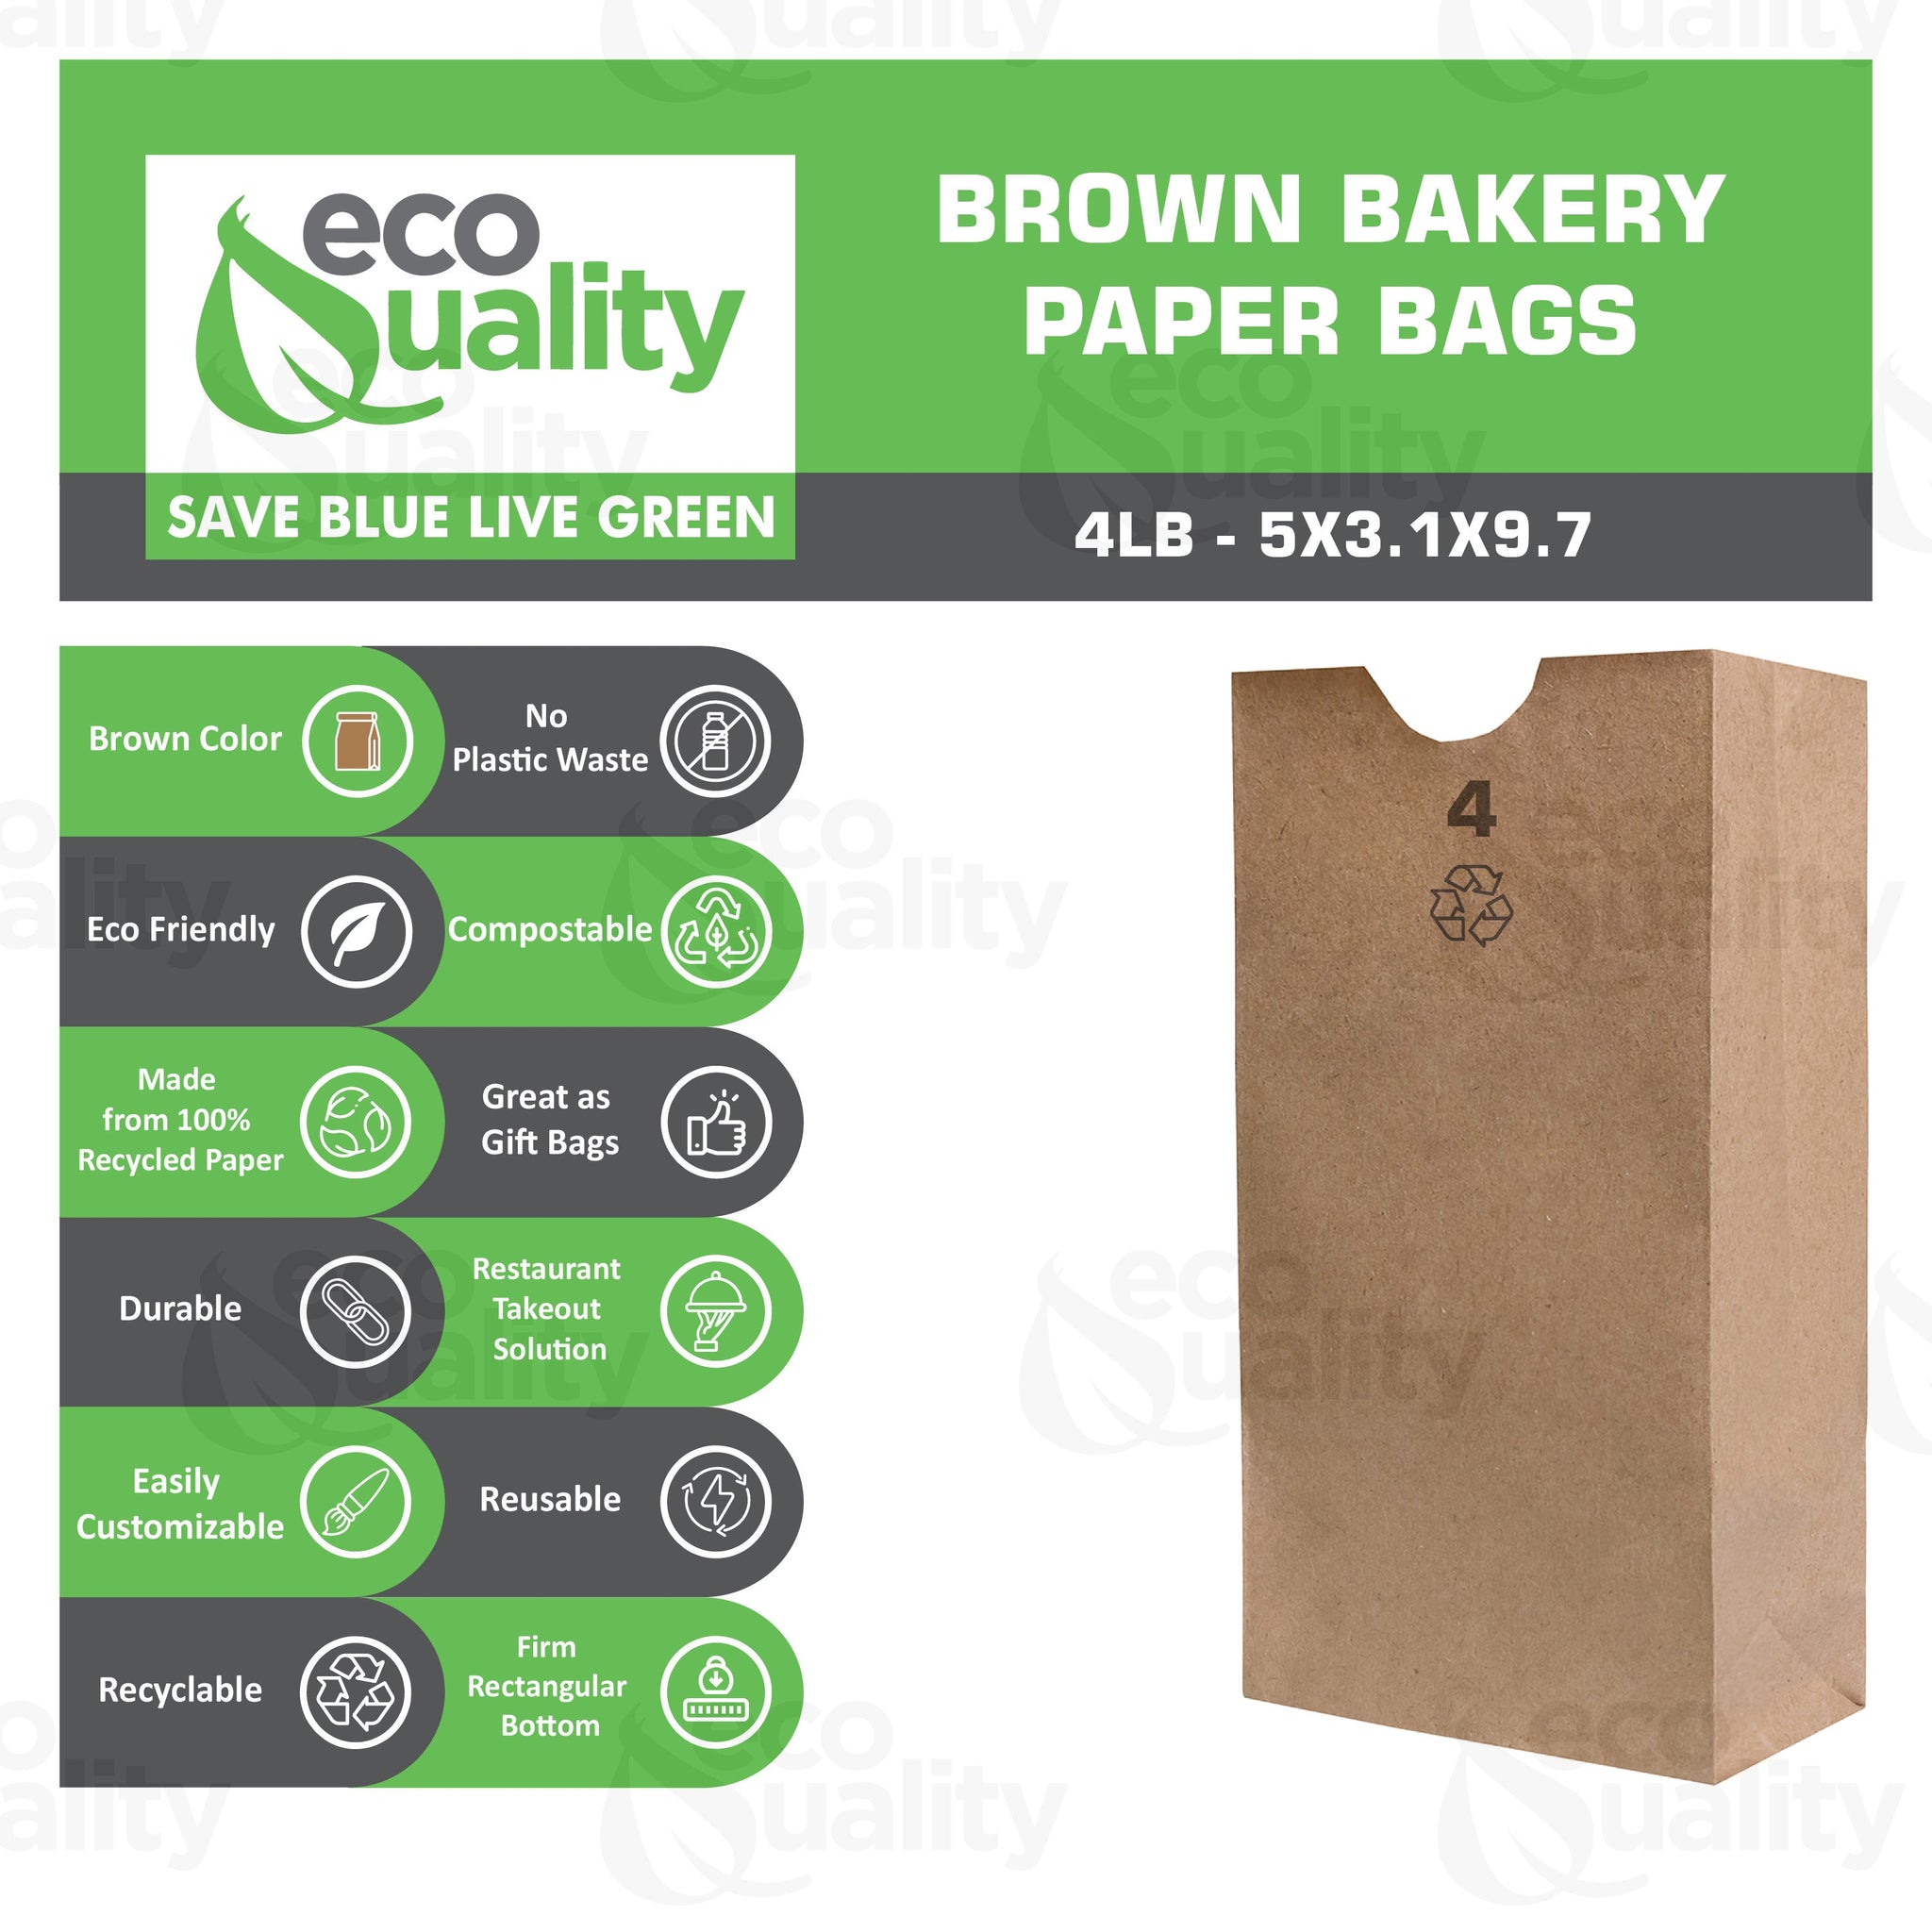 4 pound disposable bag brown Paper Bags Shopping Bags foldable catering bags brown kraft paper bag 4 pound candy bag snack bag gift bags DIY Bags arts and craft Sandwich Bag party favor bag lunch bag togo bag takeout bag Restaurant supplies paper bags Kraft Paper Bags kraft grocery bags Household Supplies affordable bulk economical commercial wholesale compostable